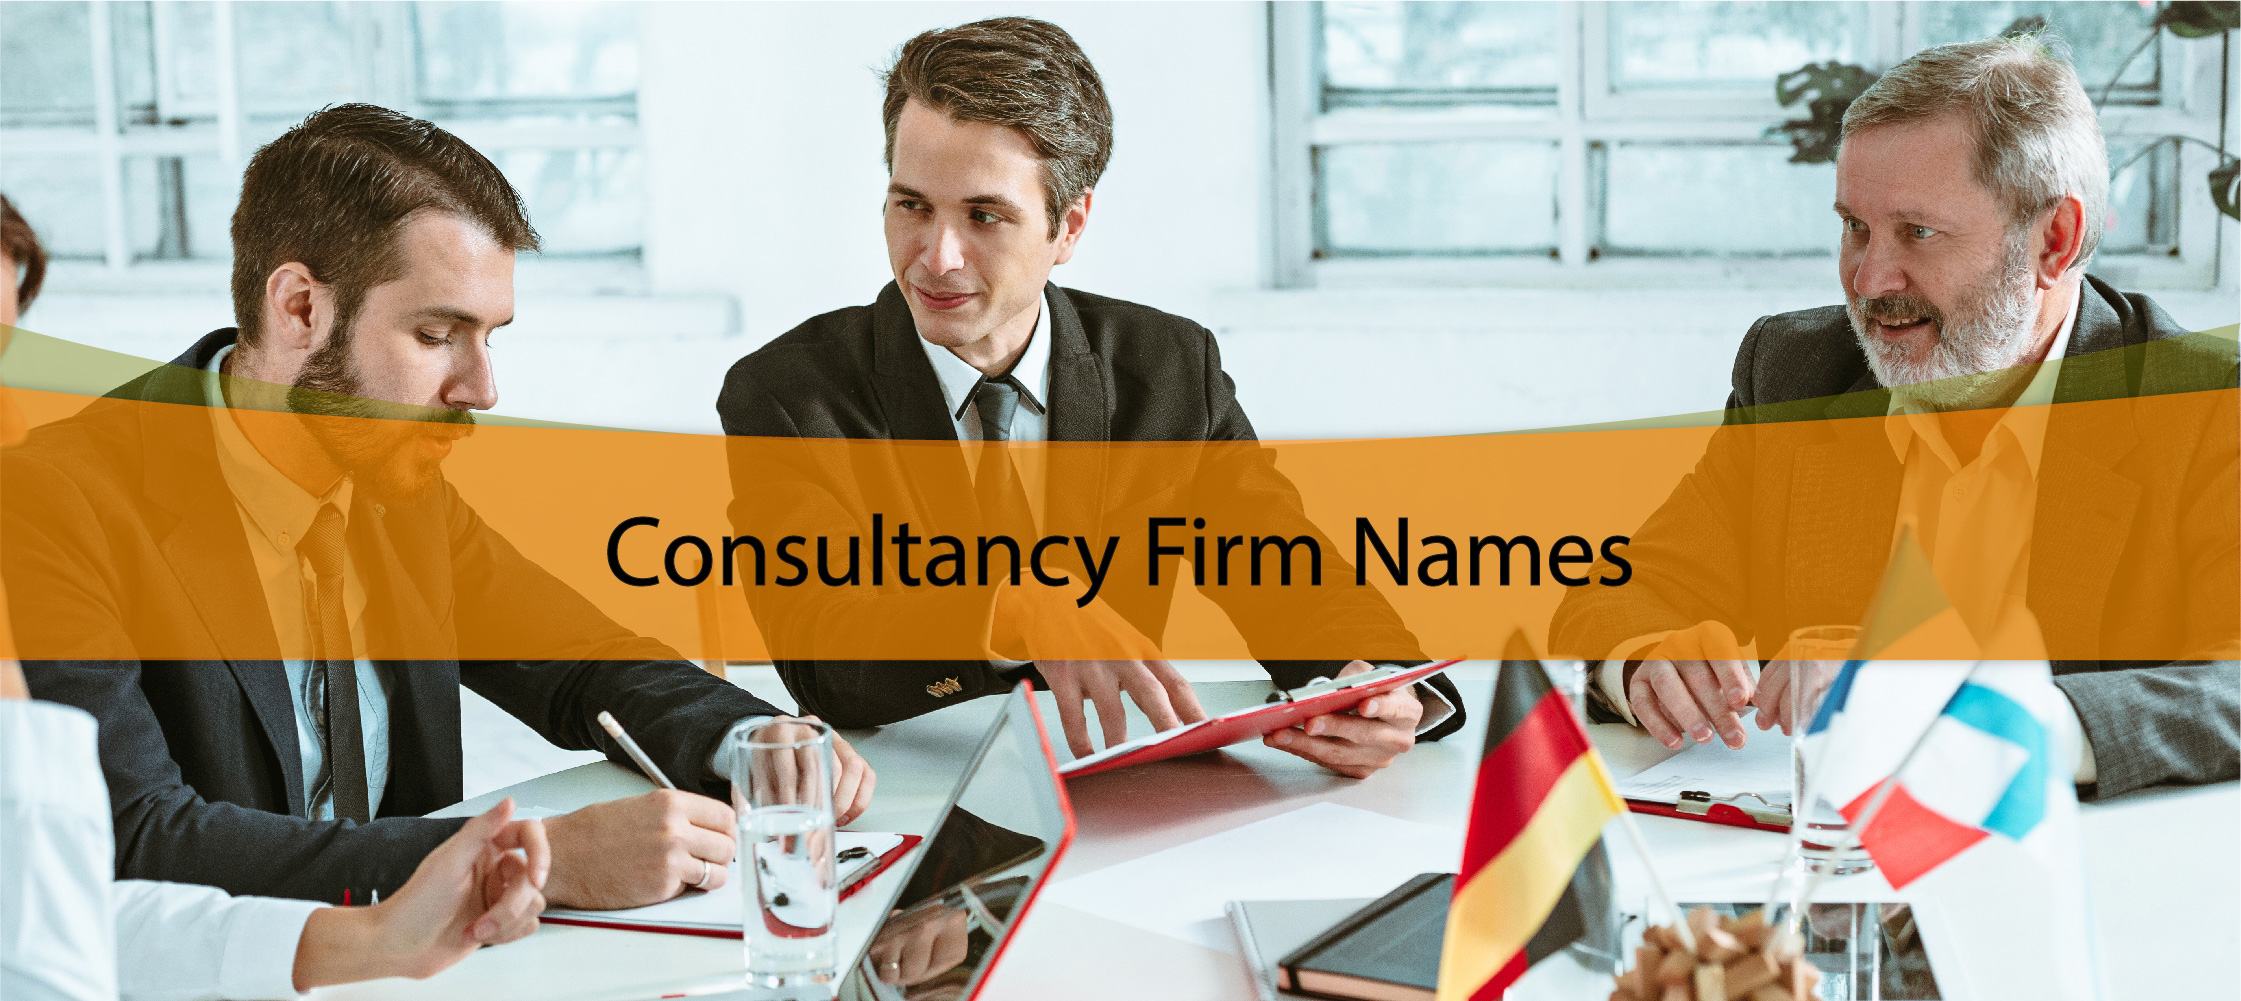 Consultancy Firm Names